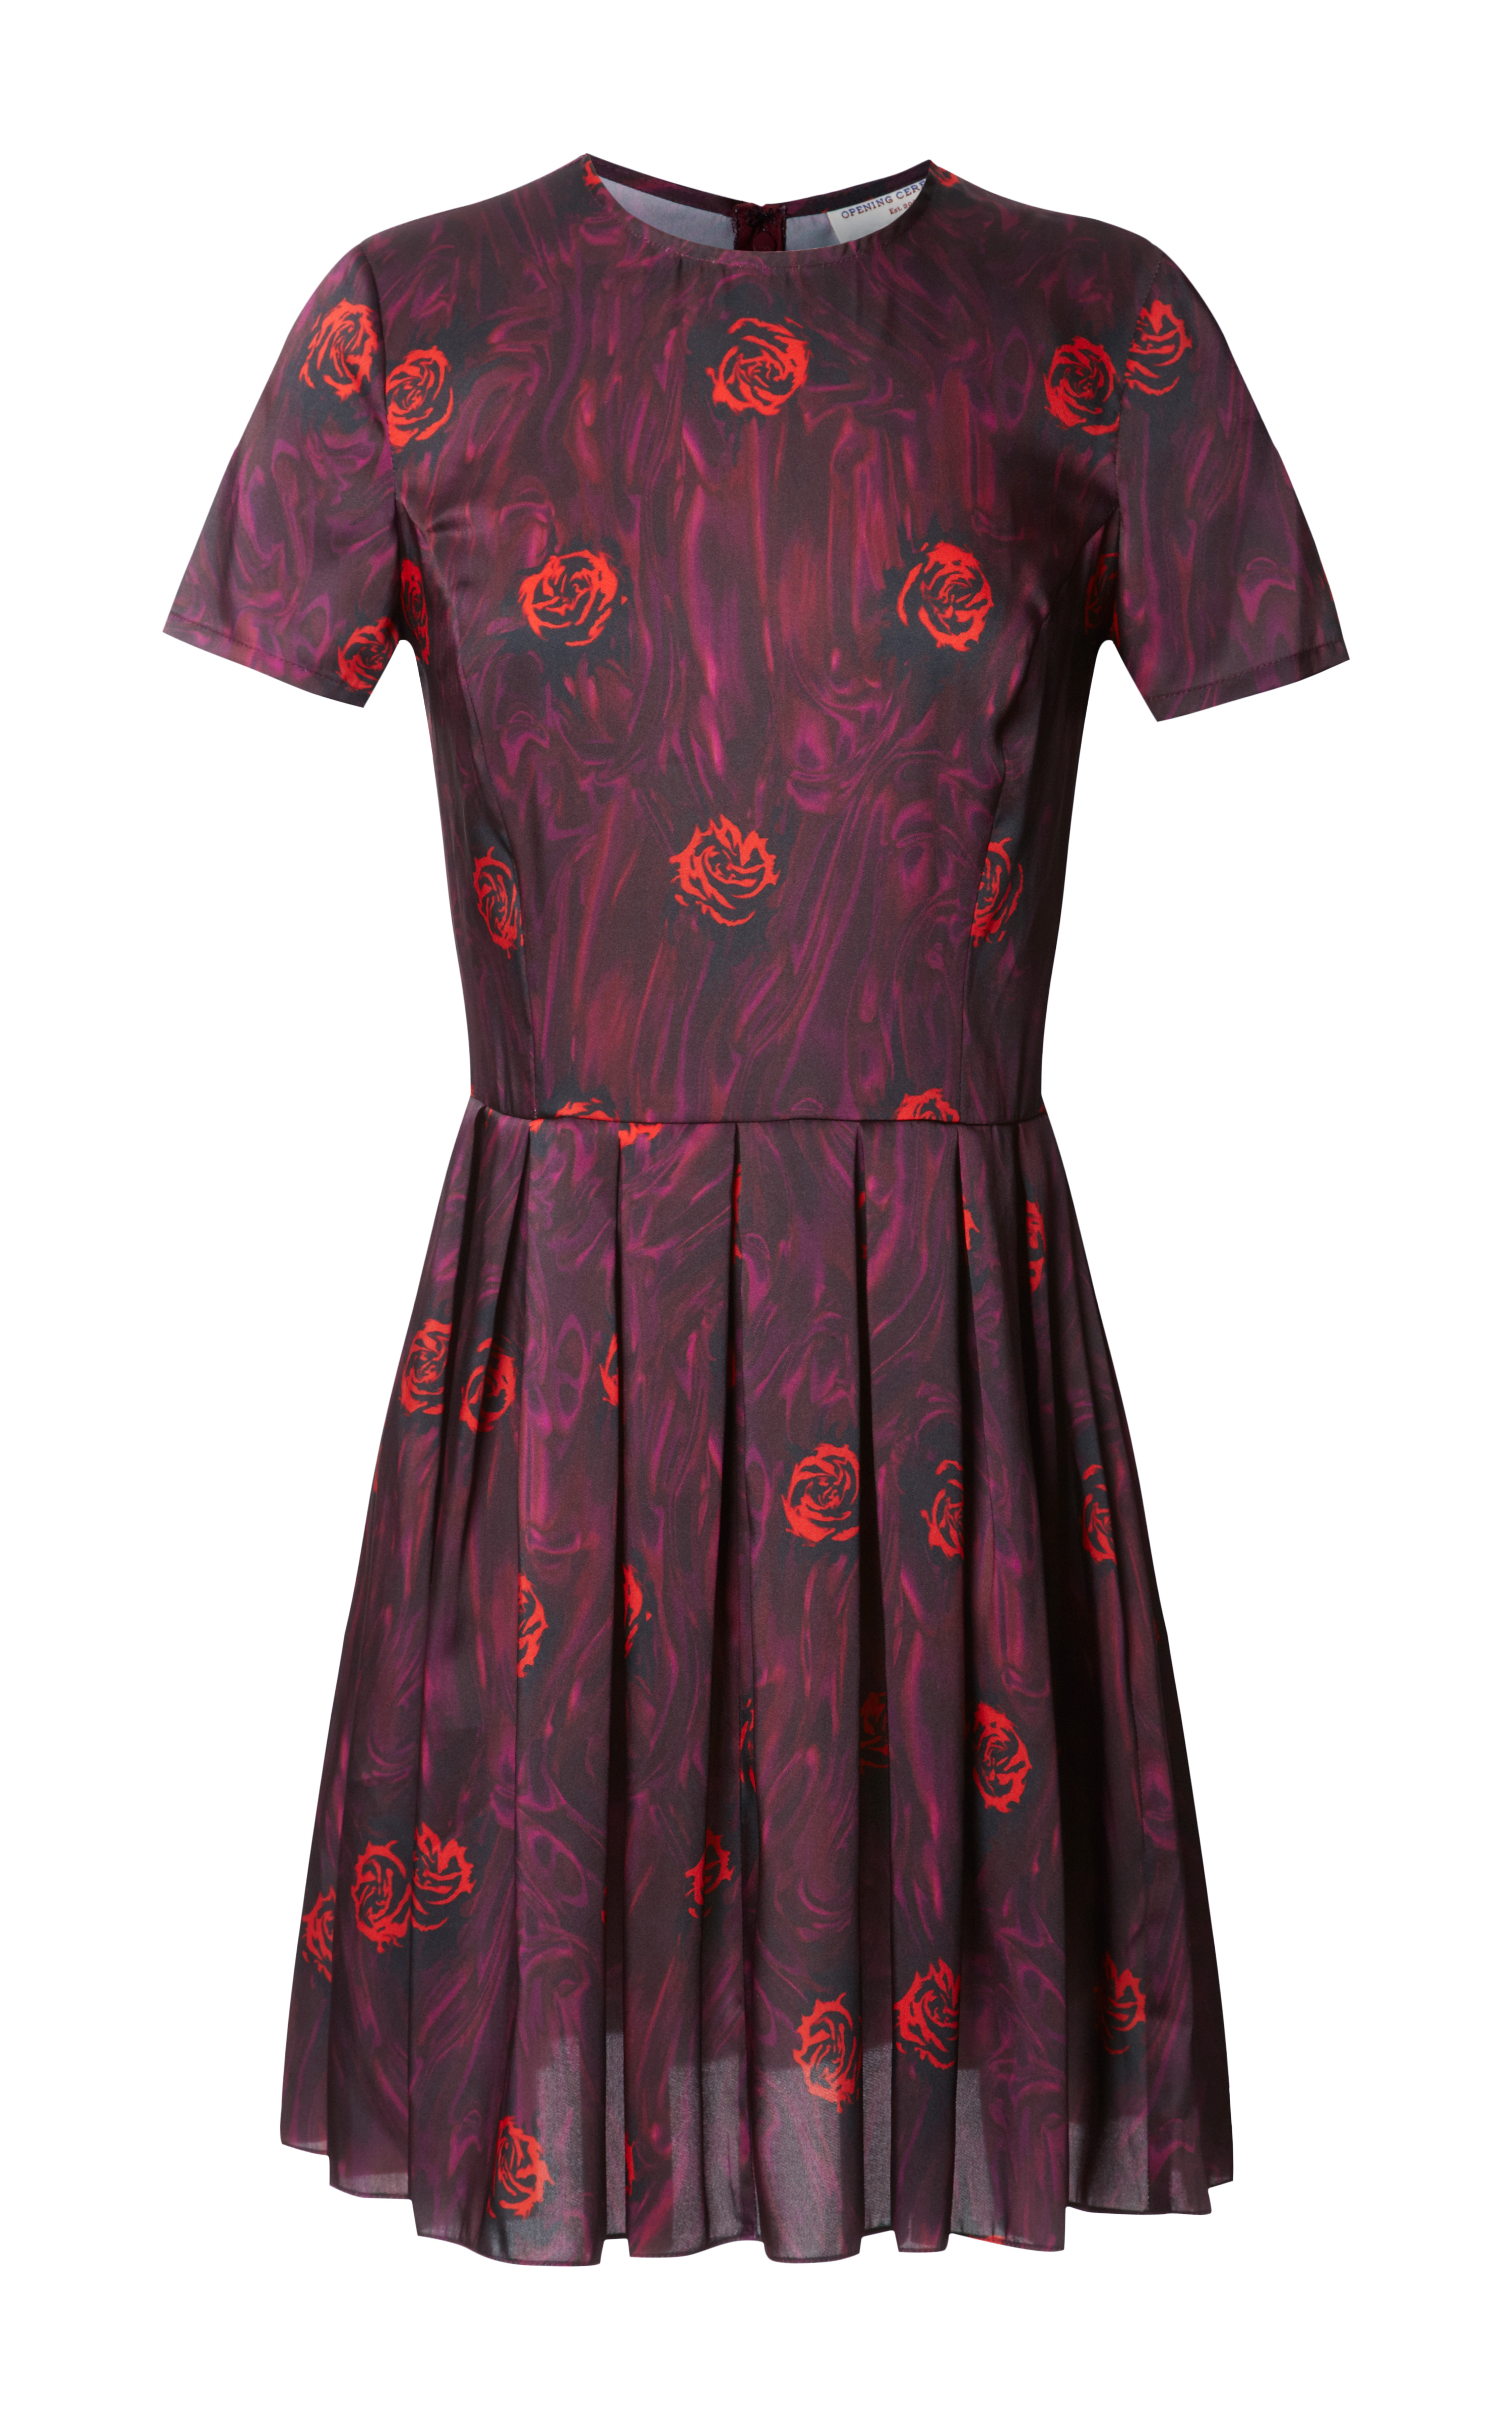 Opening ceremony Lizzy Floral Pleated Dress in Red | Lyst